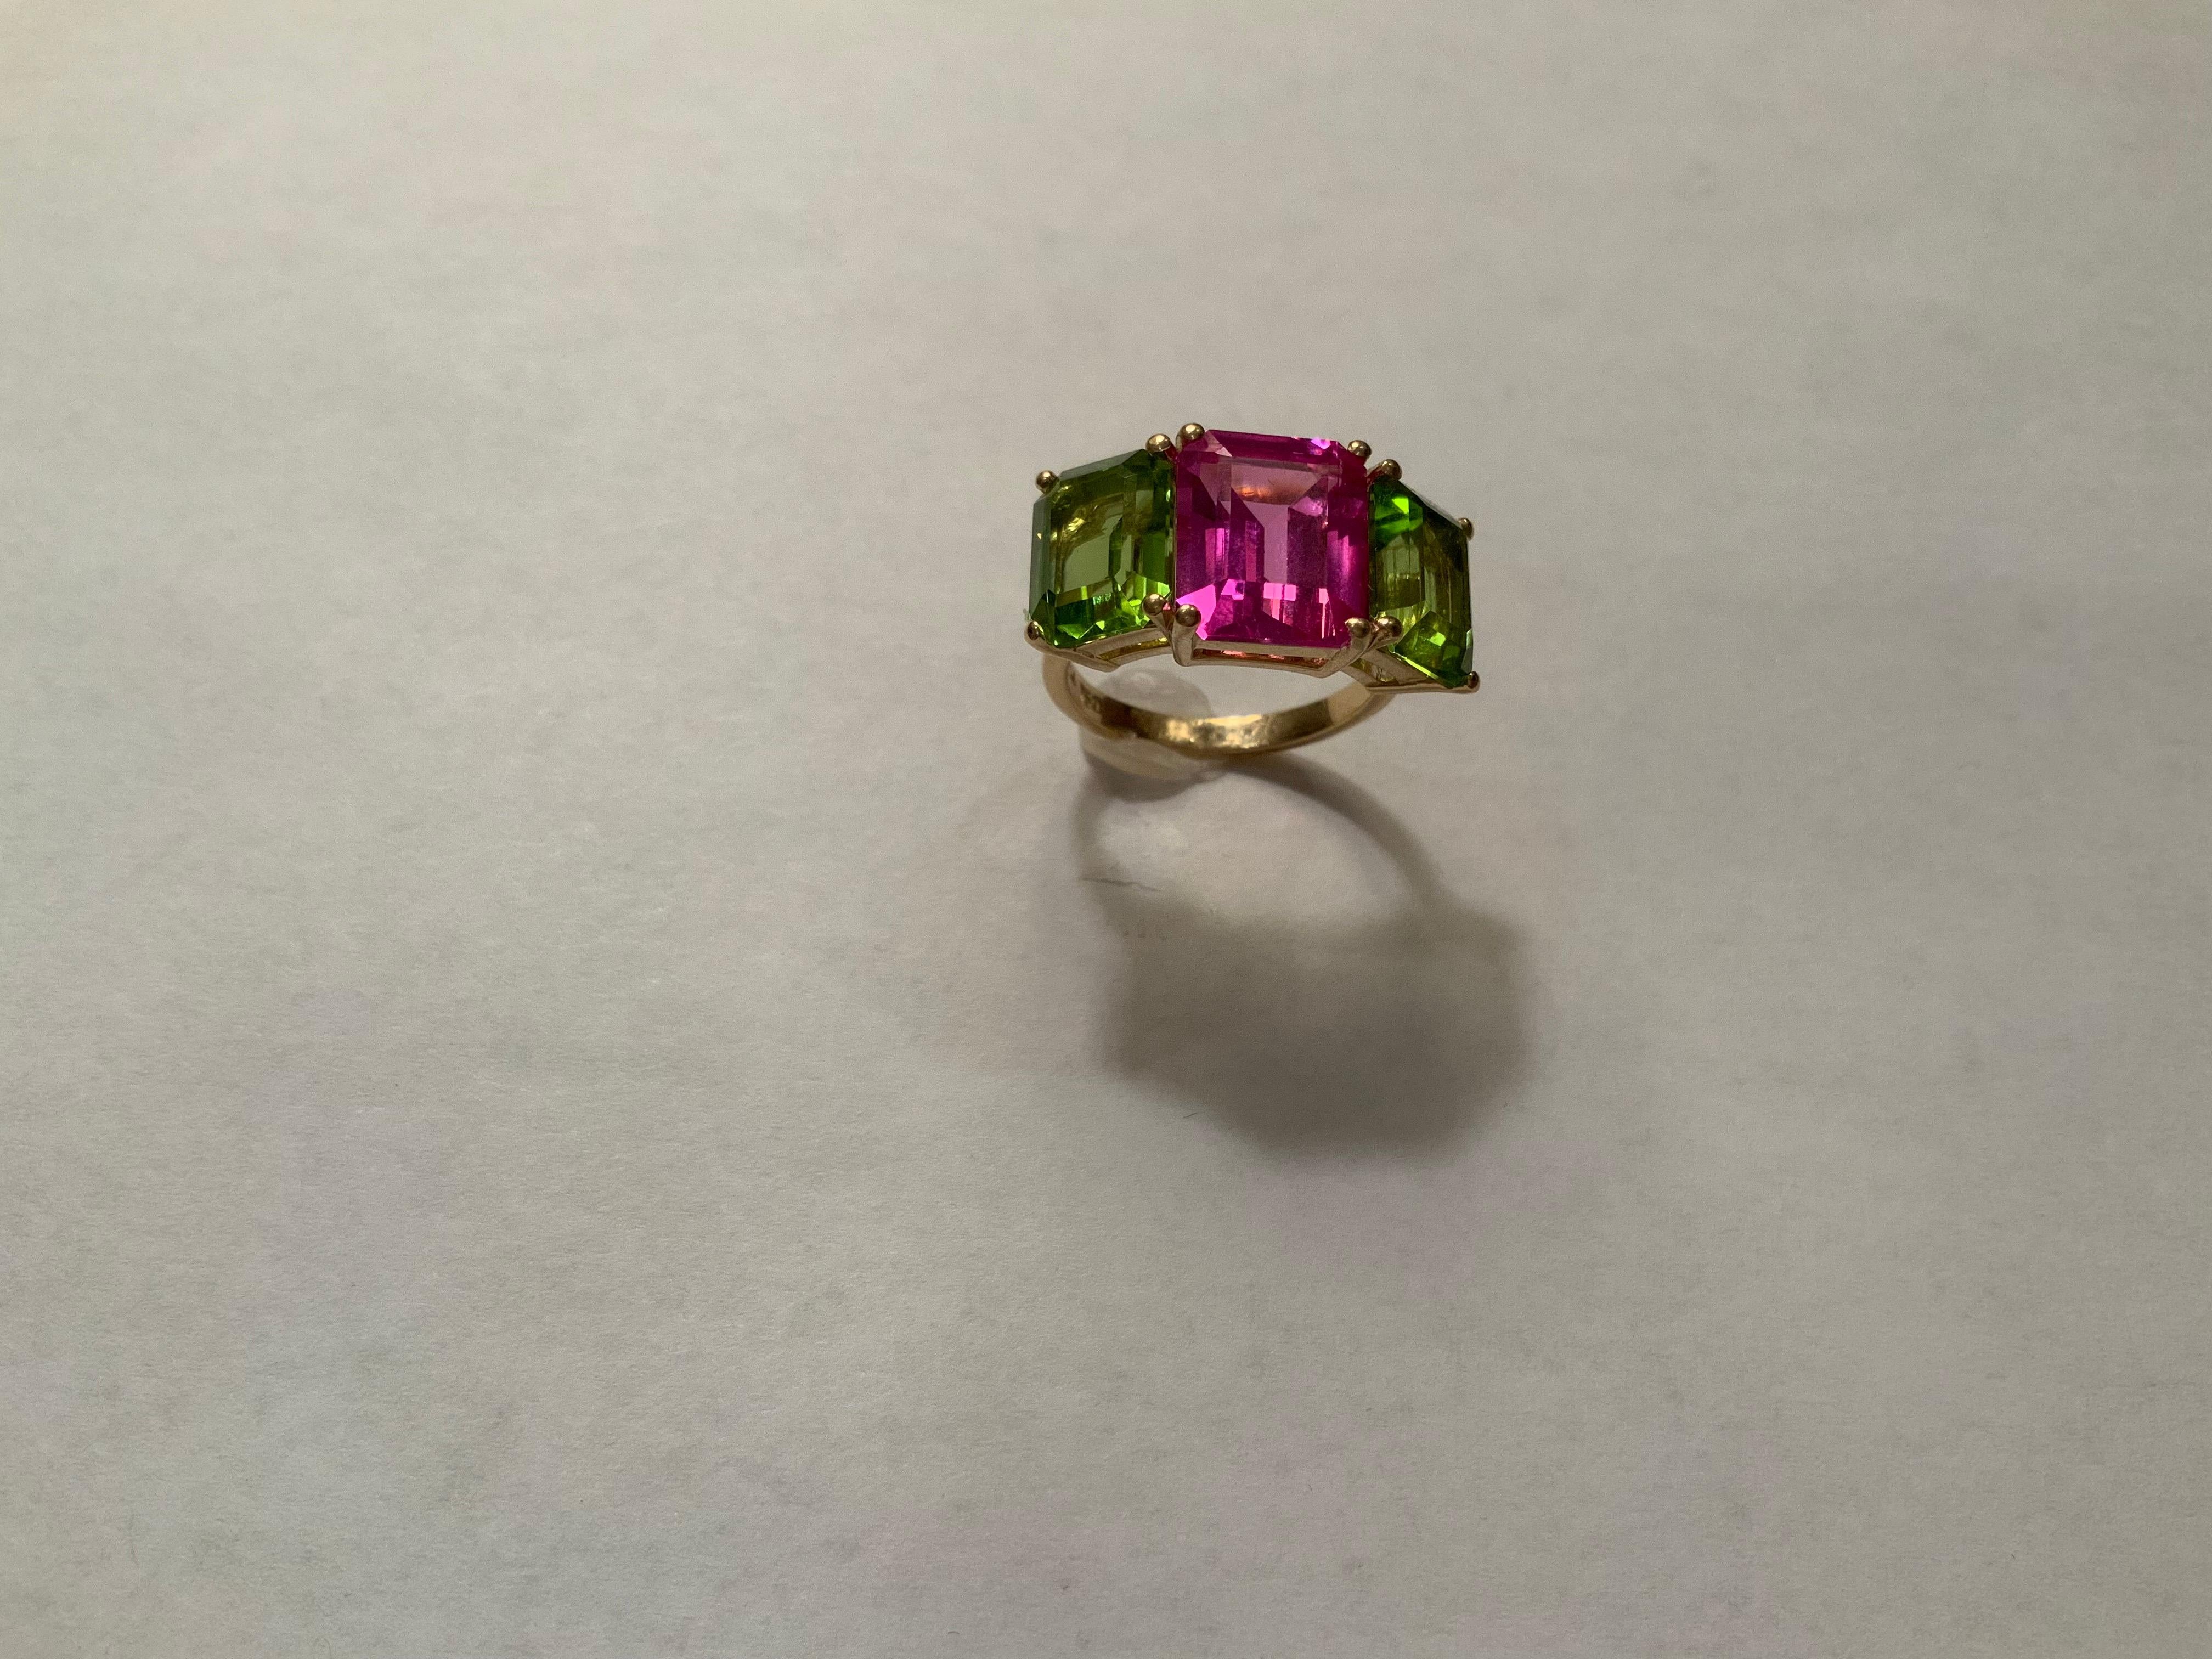 Yellow Gold Semi Precious Mini Emerald Cut Ring with Pink Topaz and Peridot For Sale 10